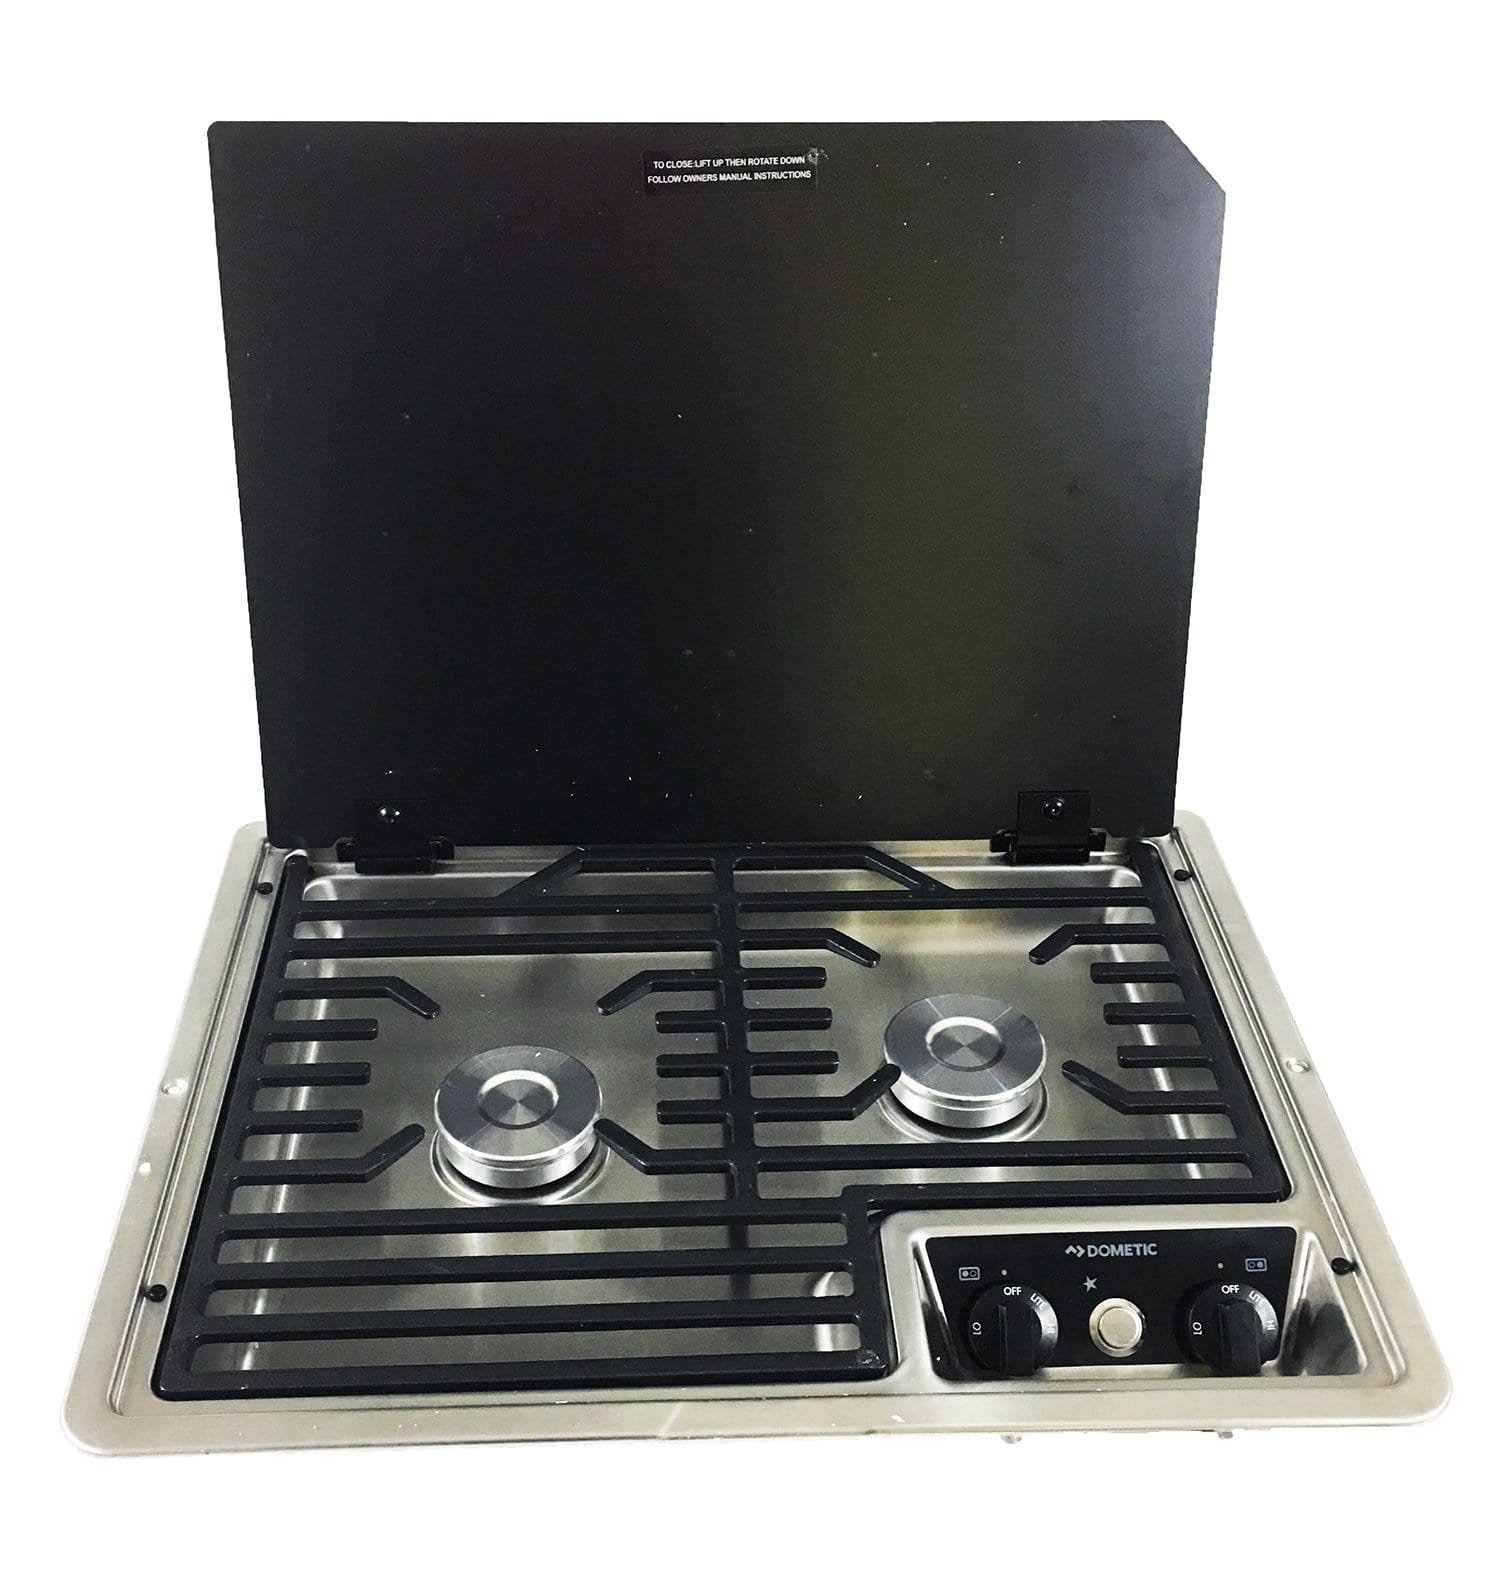 Dometic 50216G RV 2-Burner Propane Cooktop With Glass Cover